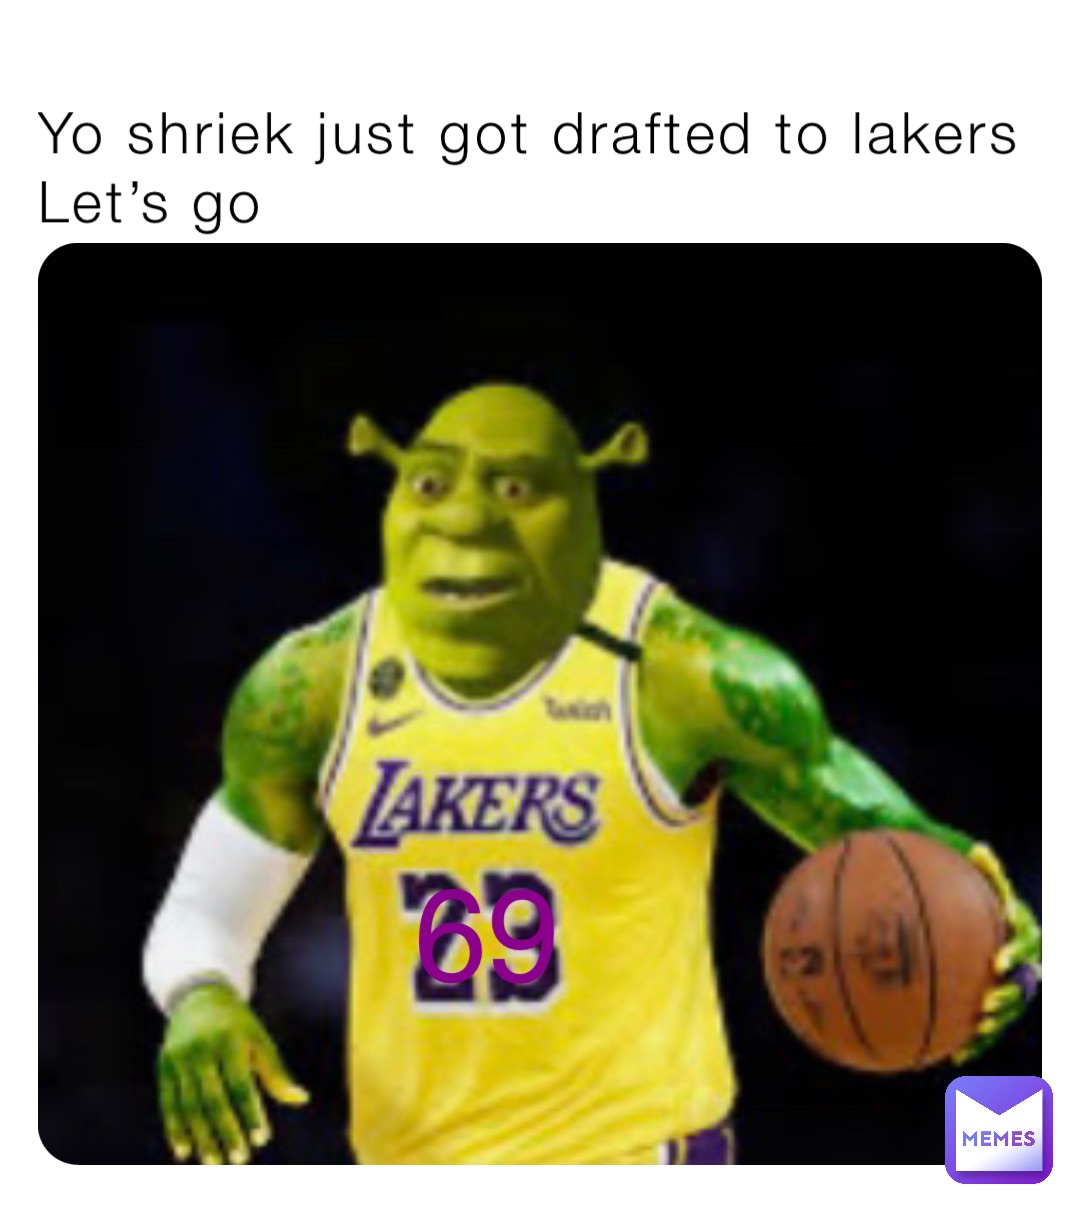 Yo shriek just got drafted to lakers 
Let’s go 69